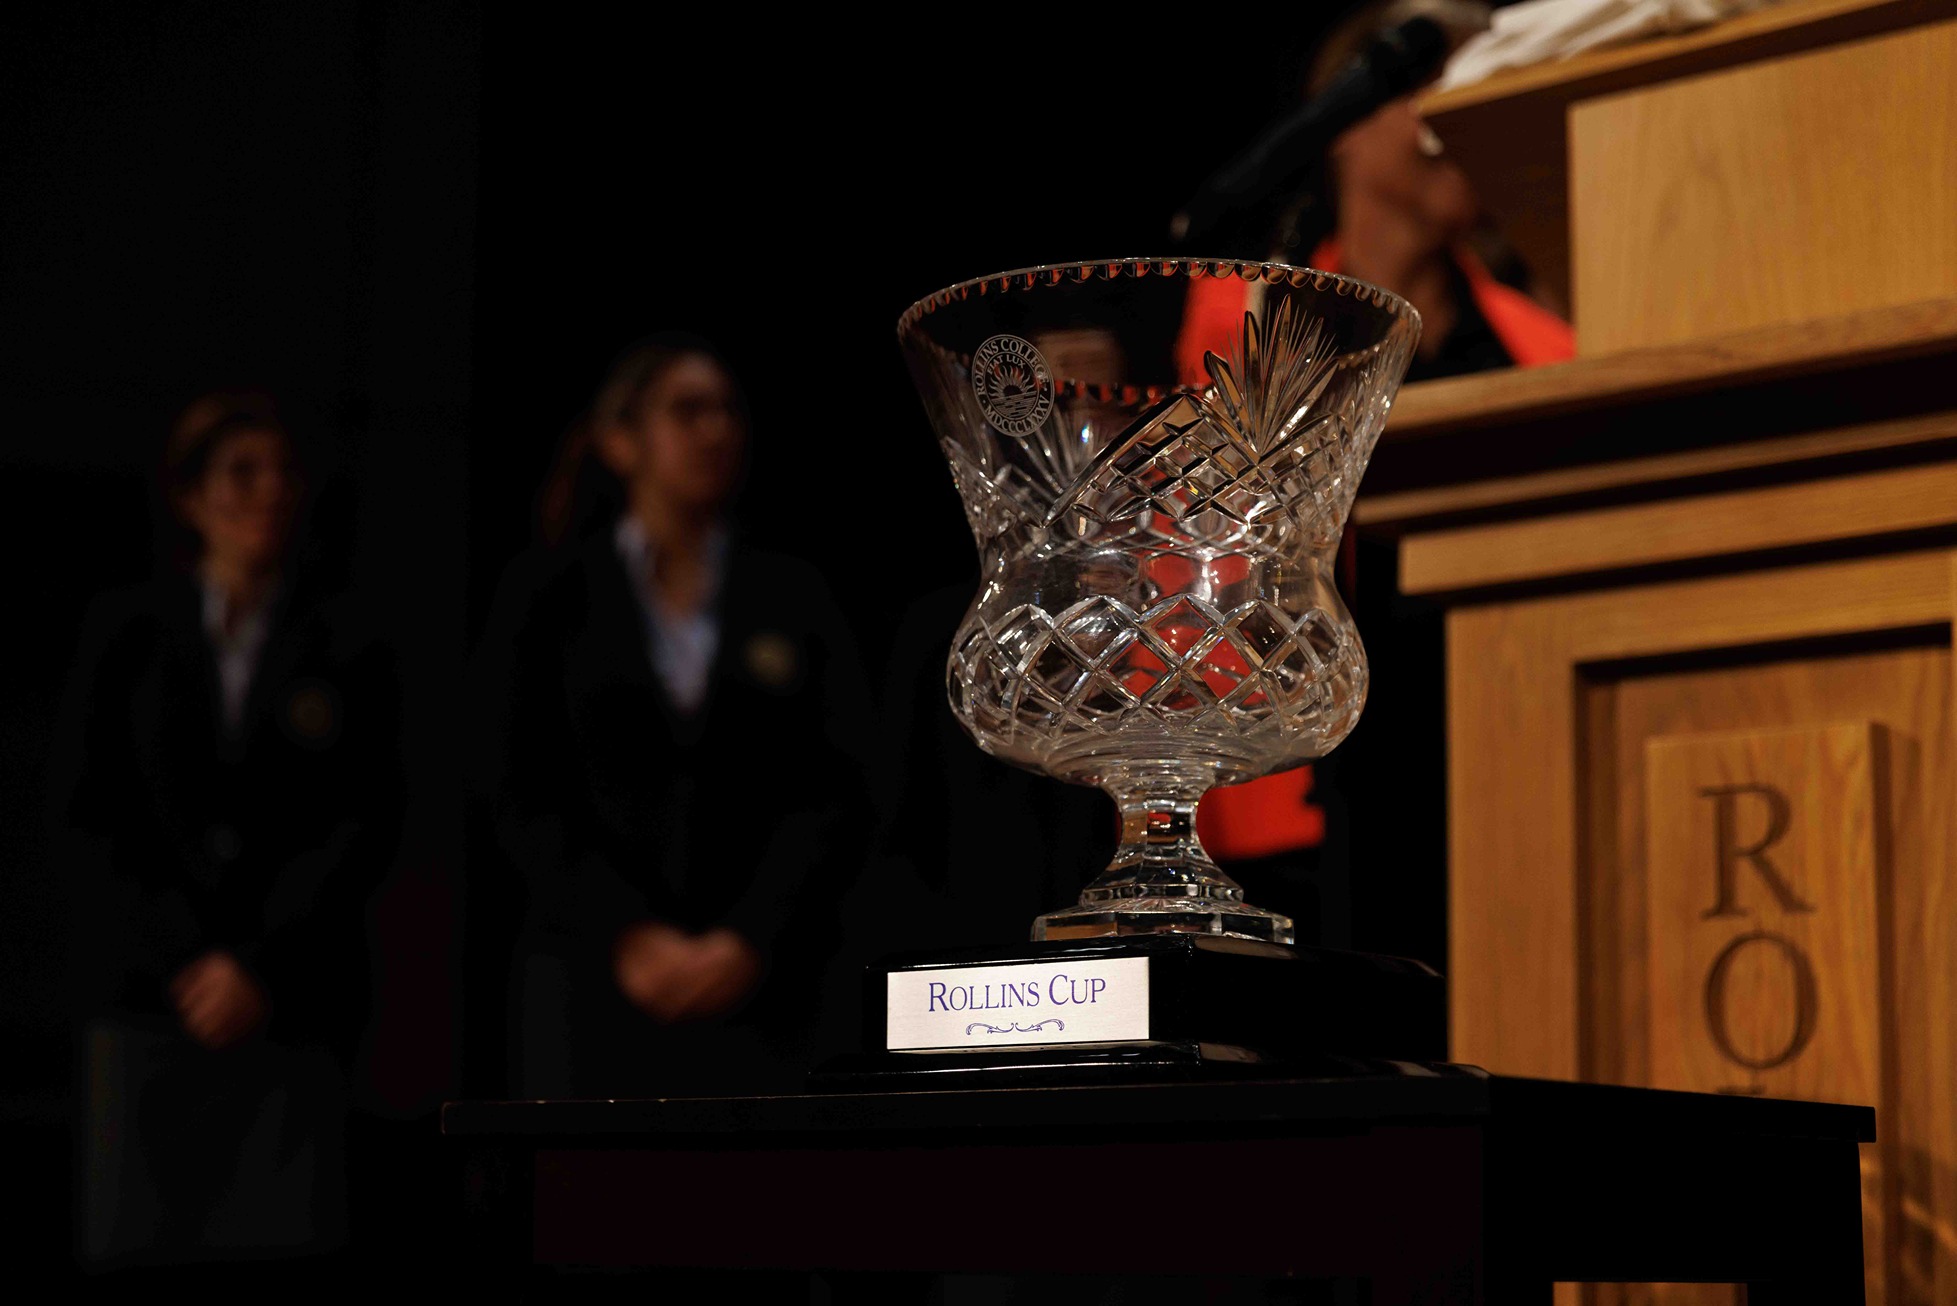 Every year, debating societies from colleges and universities around the world compete for the Rollins Cup.